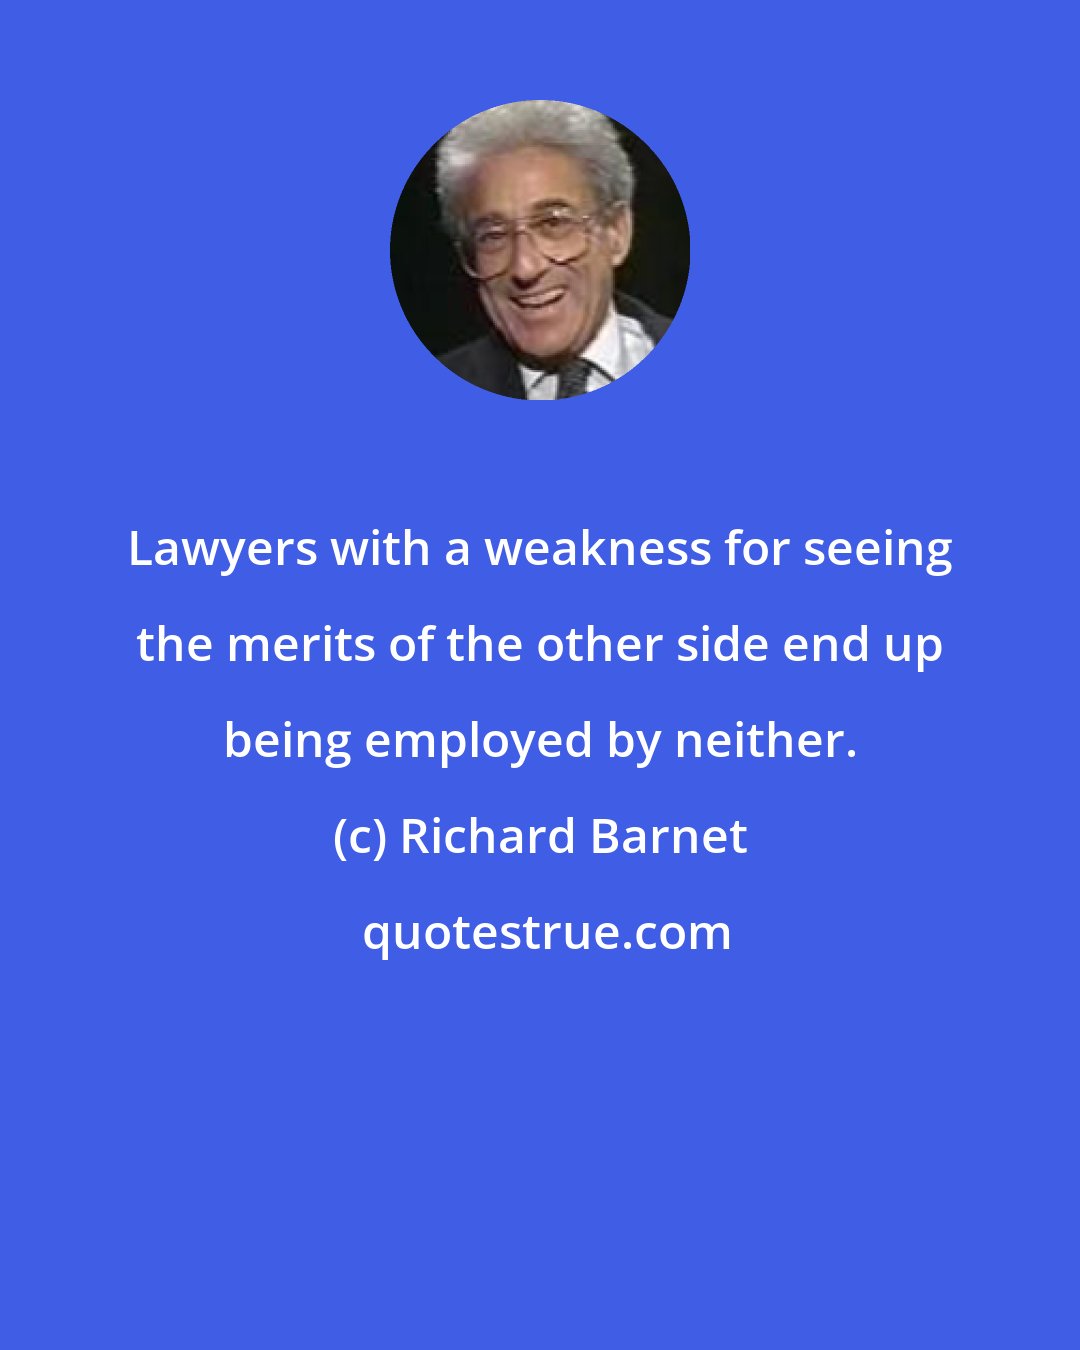 Richard Barnet: Lawyers with a weakness for seeing the merits of the other side end up being employed by neither.